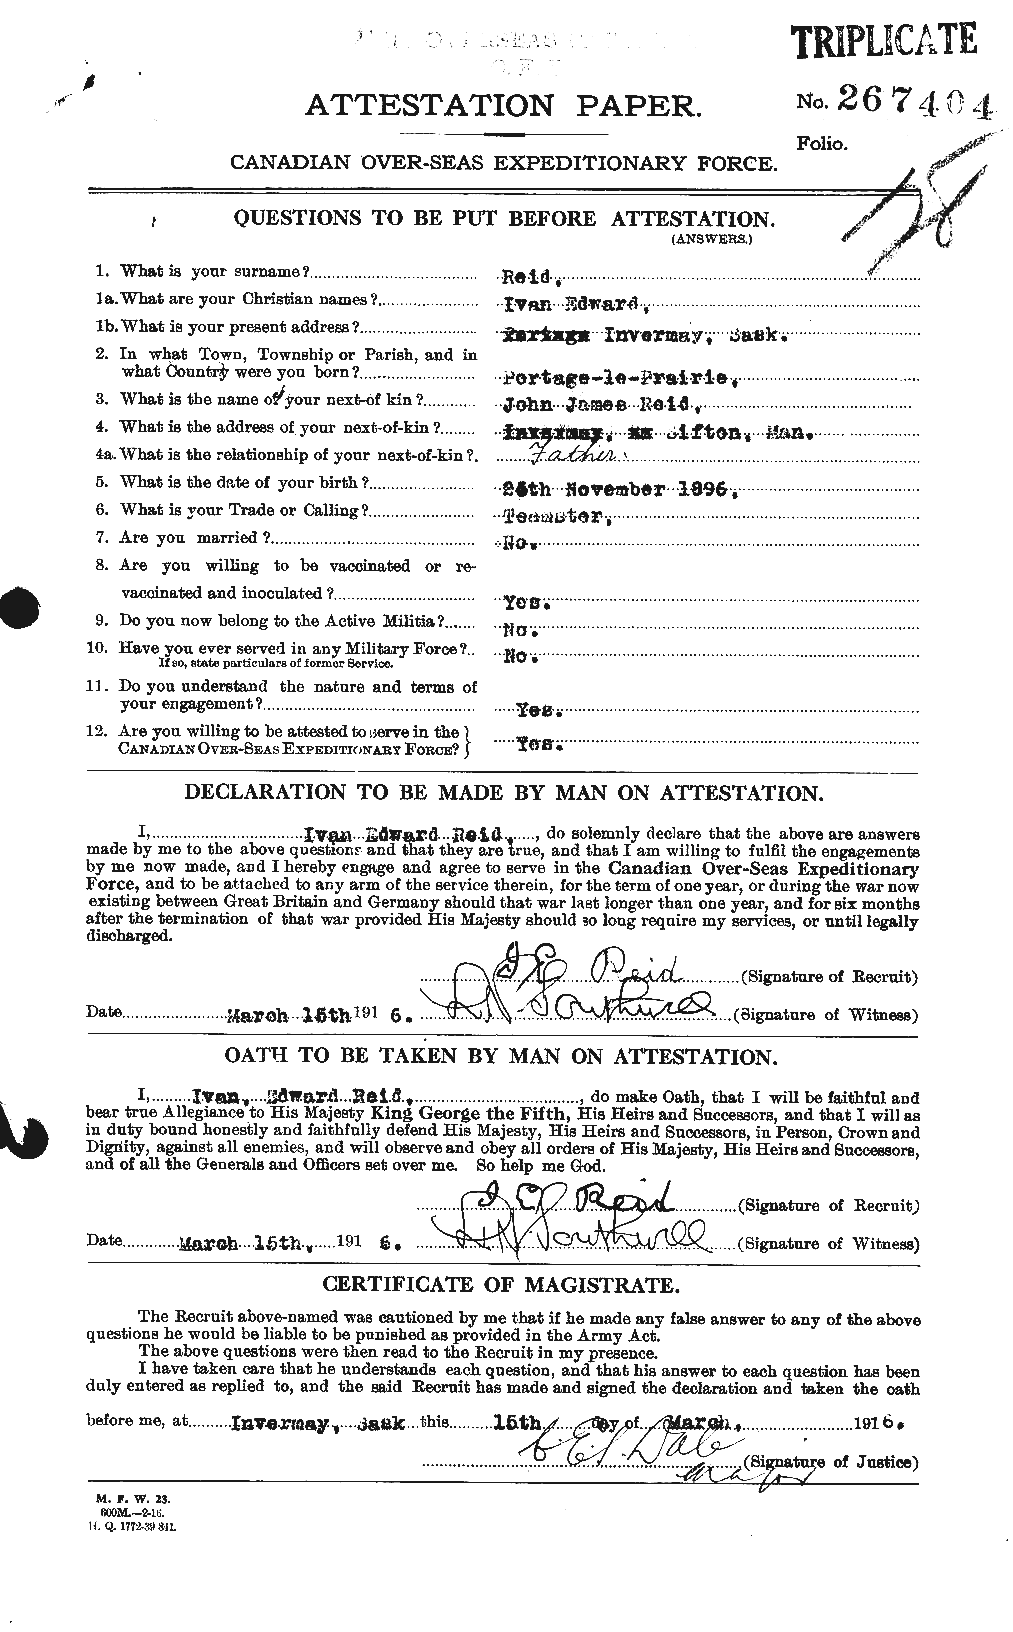 Personnel Records of the First World War - CEF 598639a